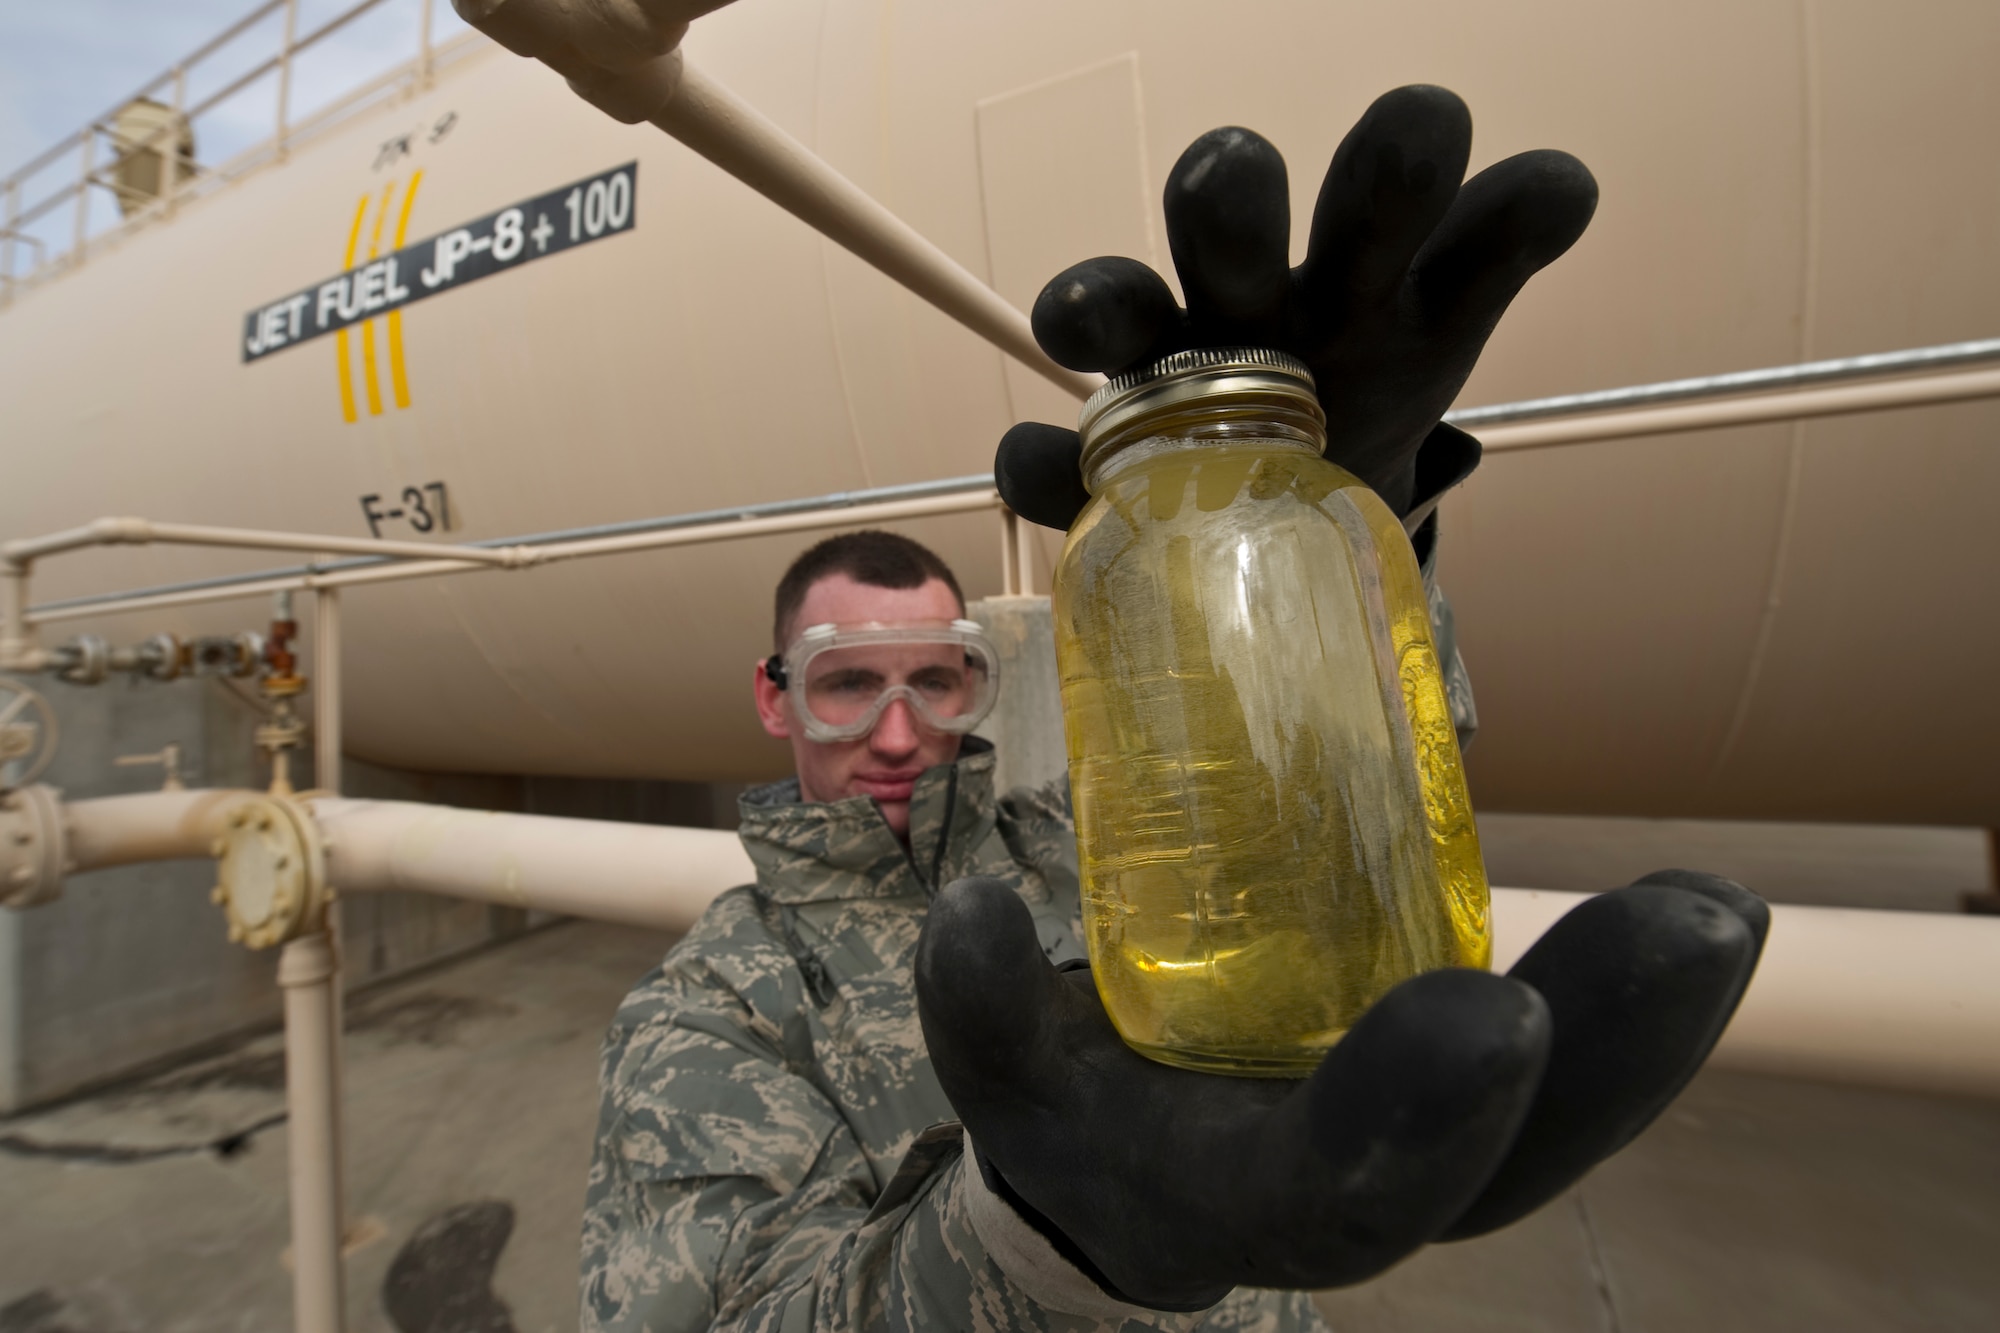 HOLLOMAN AIR FORCE BASE, N.M. -- Airman Guy Peterson, 49th Fuels Management Flight, visually inspects a sample of  JP-8 jet fuel at the base's west hydrants facilities, Feb. 9, 2011. Airman Peterson is checking the color, water and sediment to ensure the fuel coming into the fuel pipe is visually clean. (U.S. Air Force photo by Airman 1st Class Joshua Turner/Released)